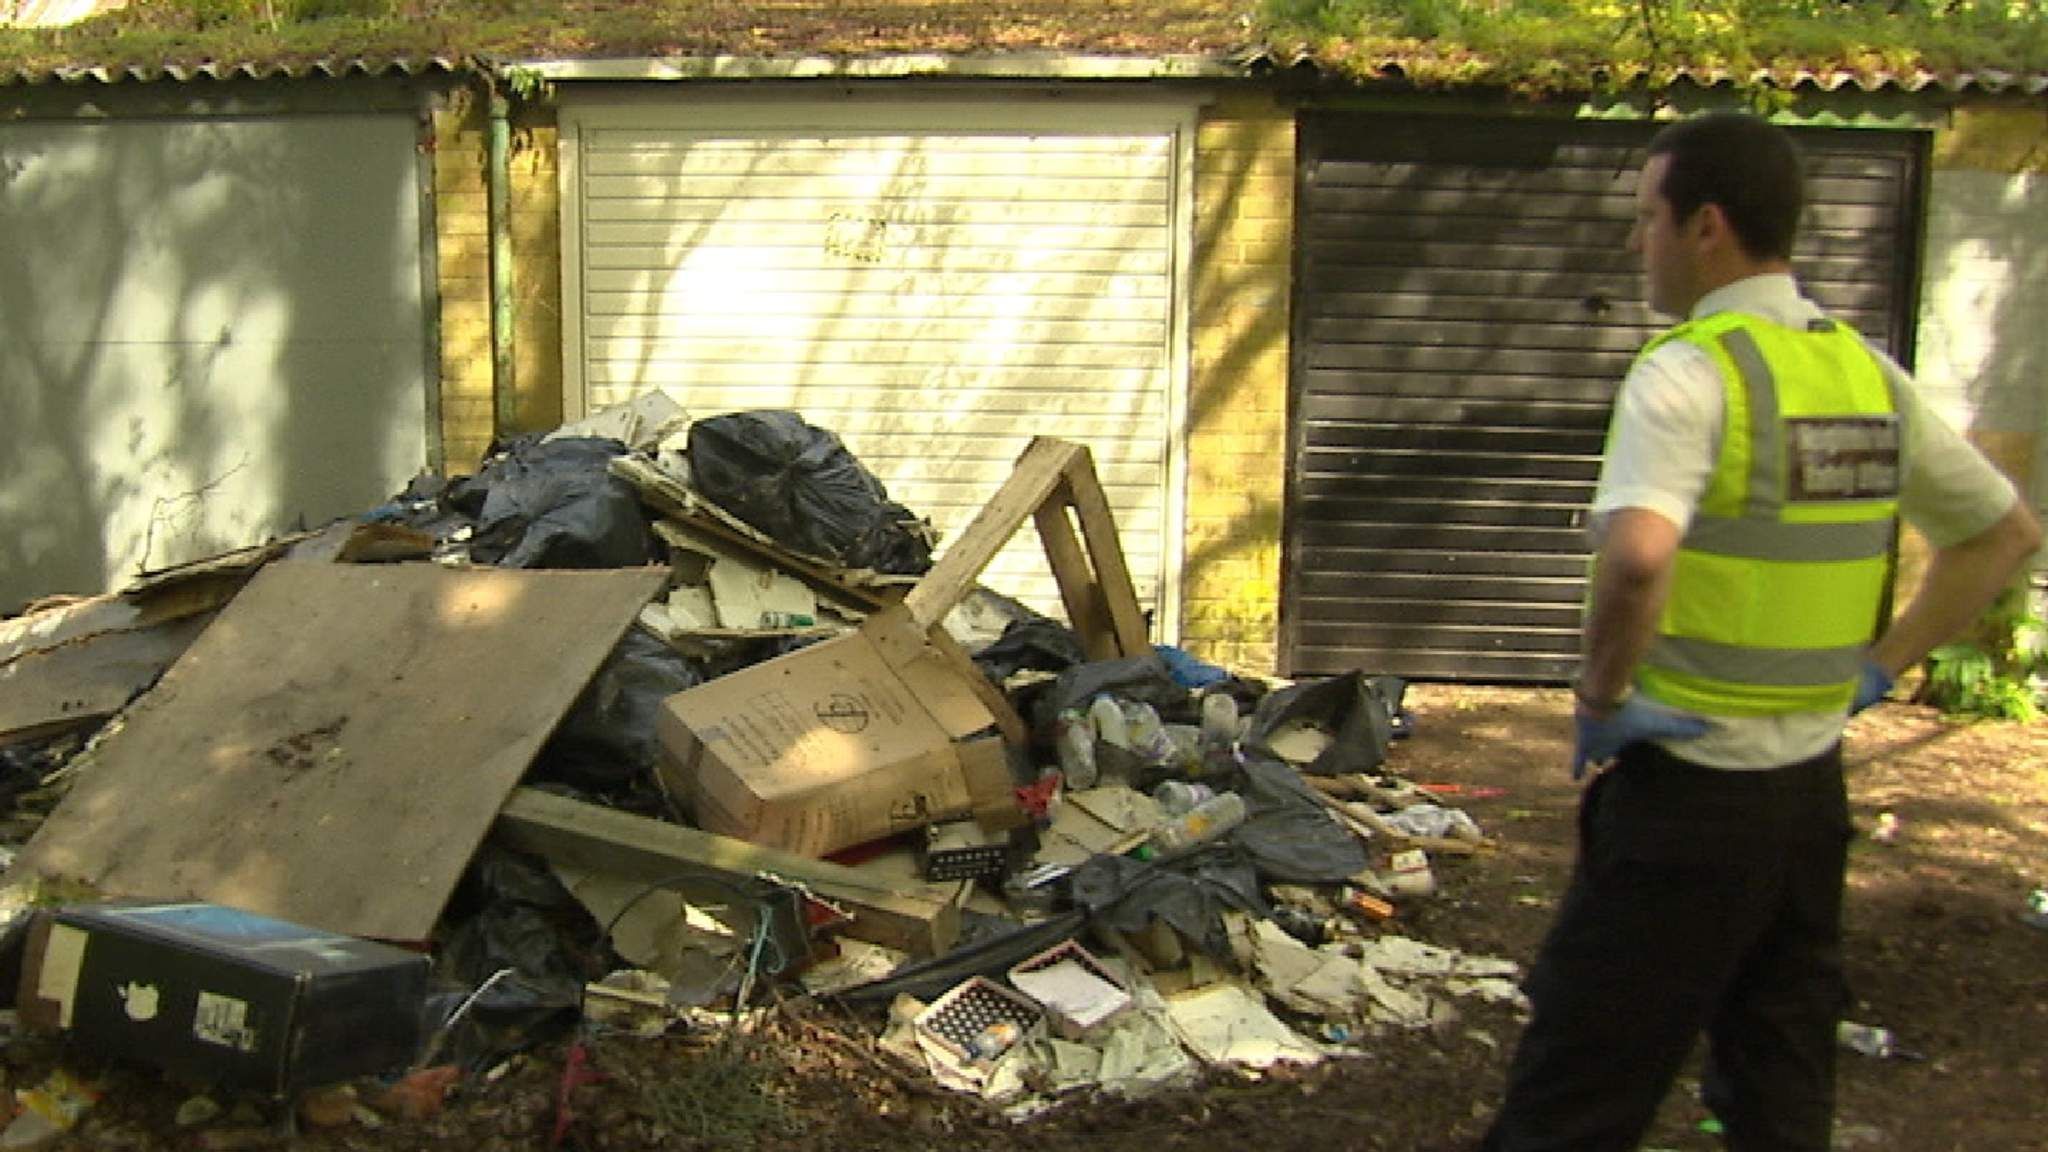 new-on-the-spot-fines-for-fly-tipping-offences-uk-news-sky-news